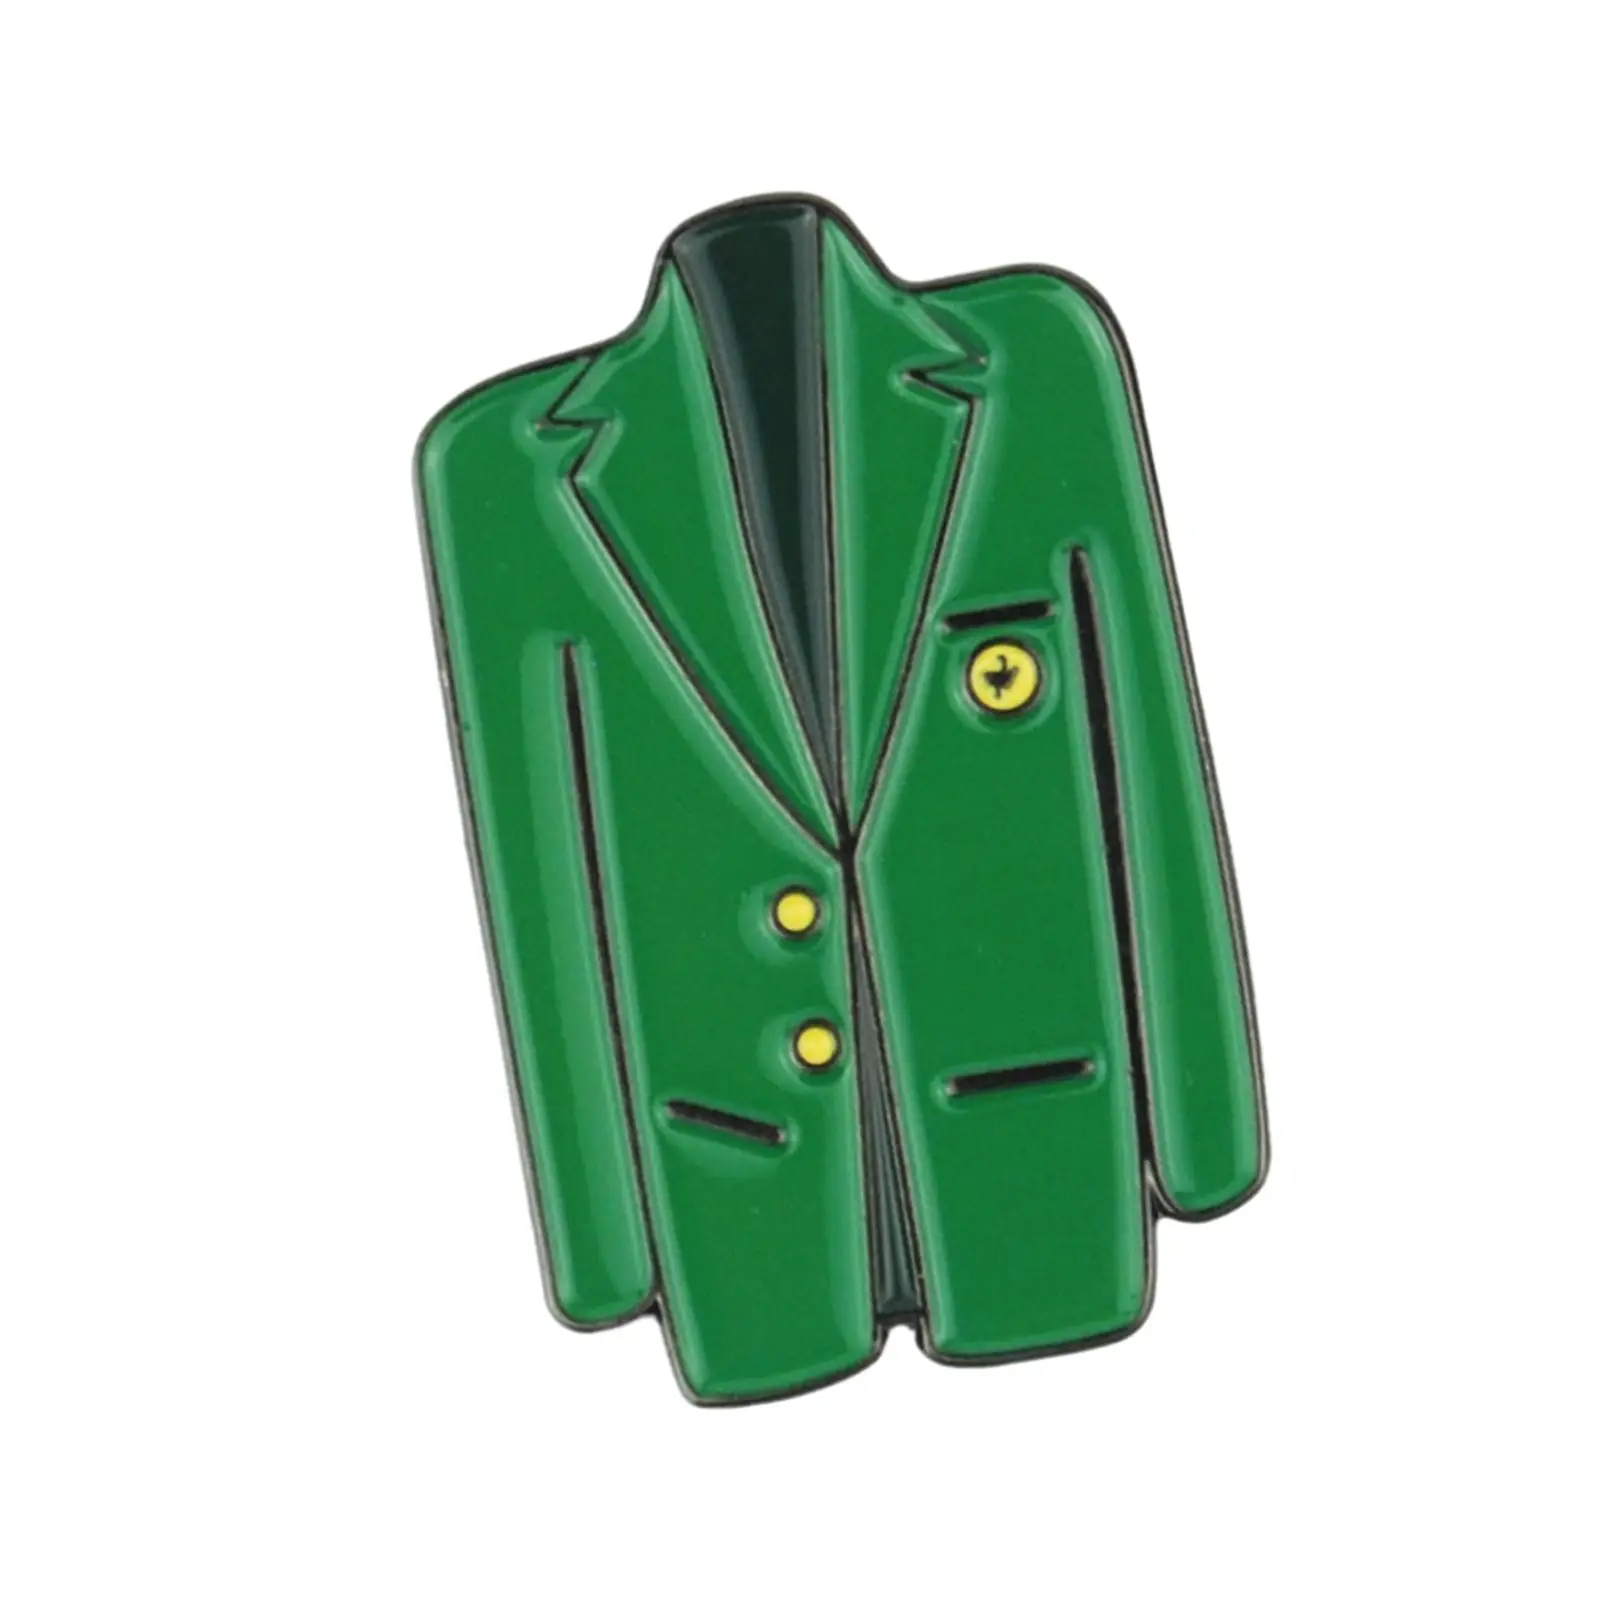 Golf Ball Marker Premium Gifts for Golf Lover Holidays Christmas Eye Catching Game Creative Green Jacket Golf Training Aid